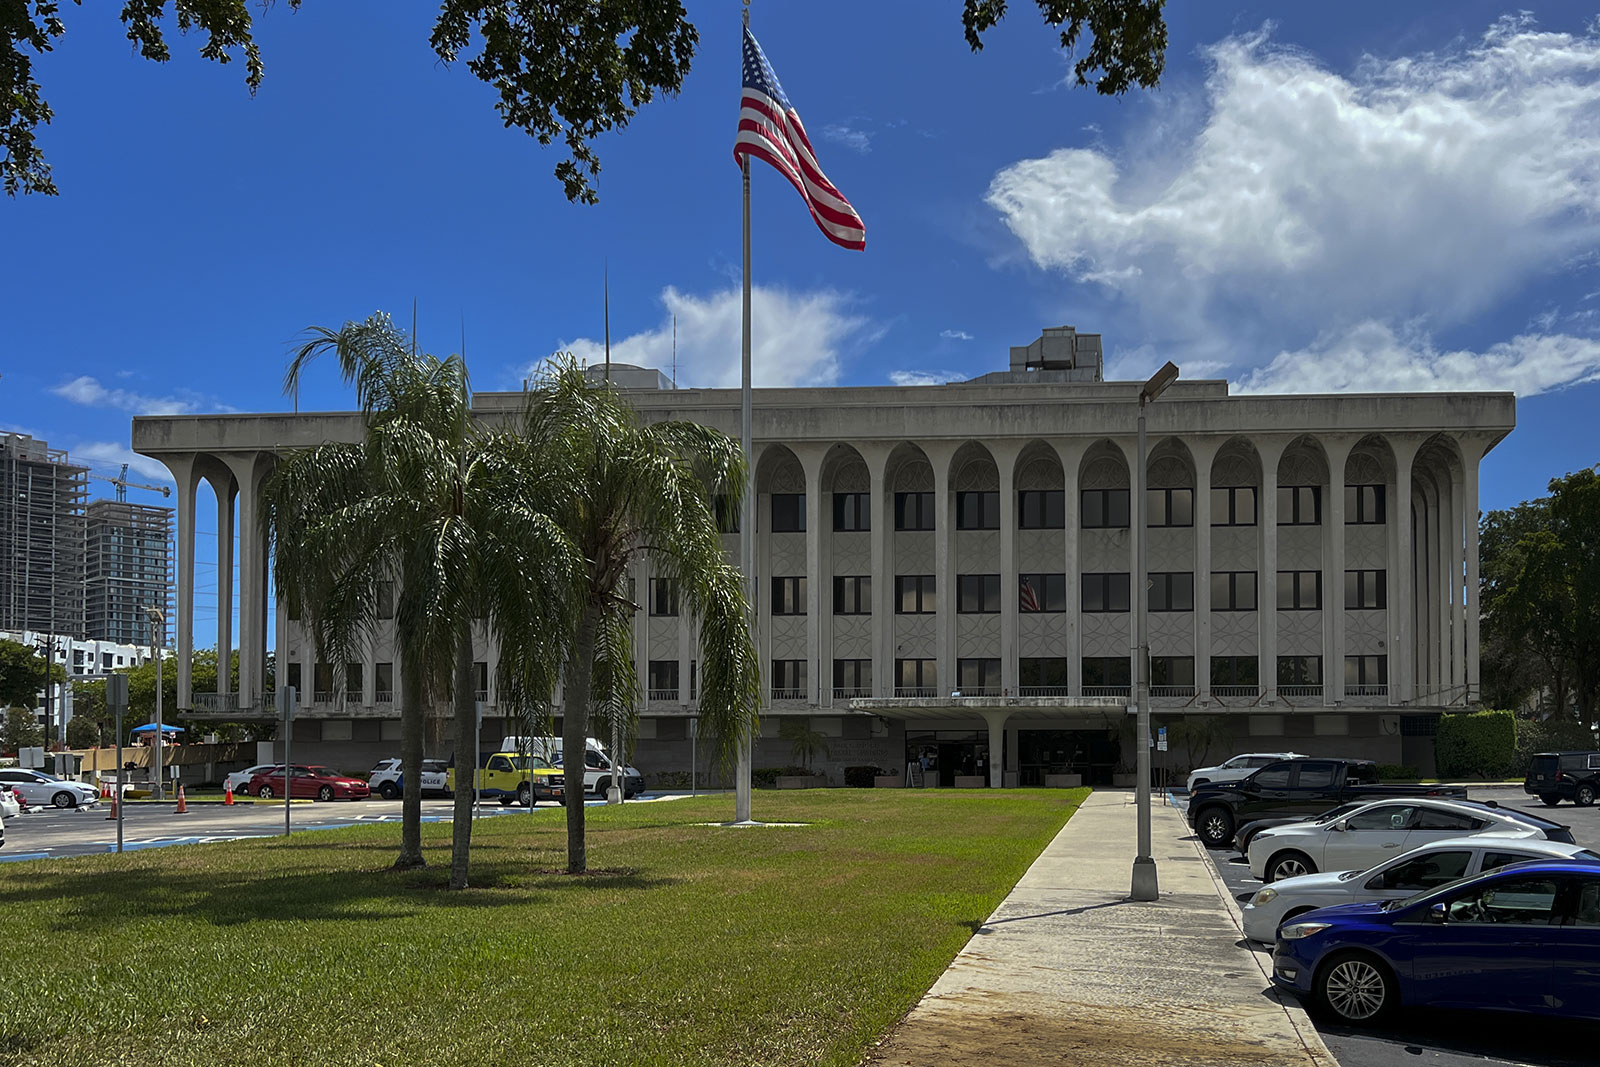 The federal court in West Palm Beach, Florida seen on Thursday, September 1. 